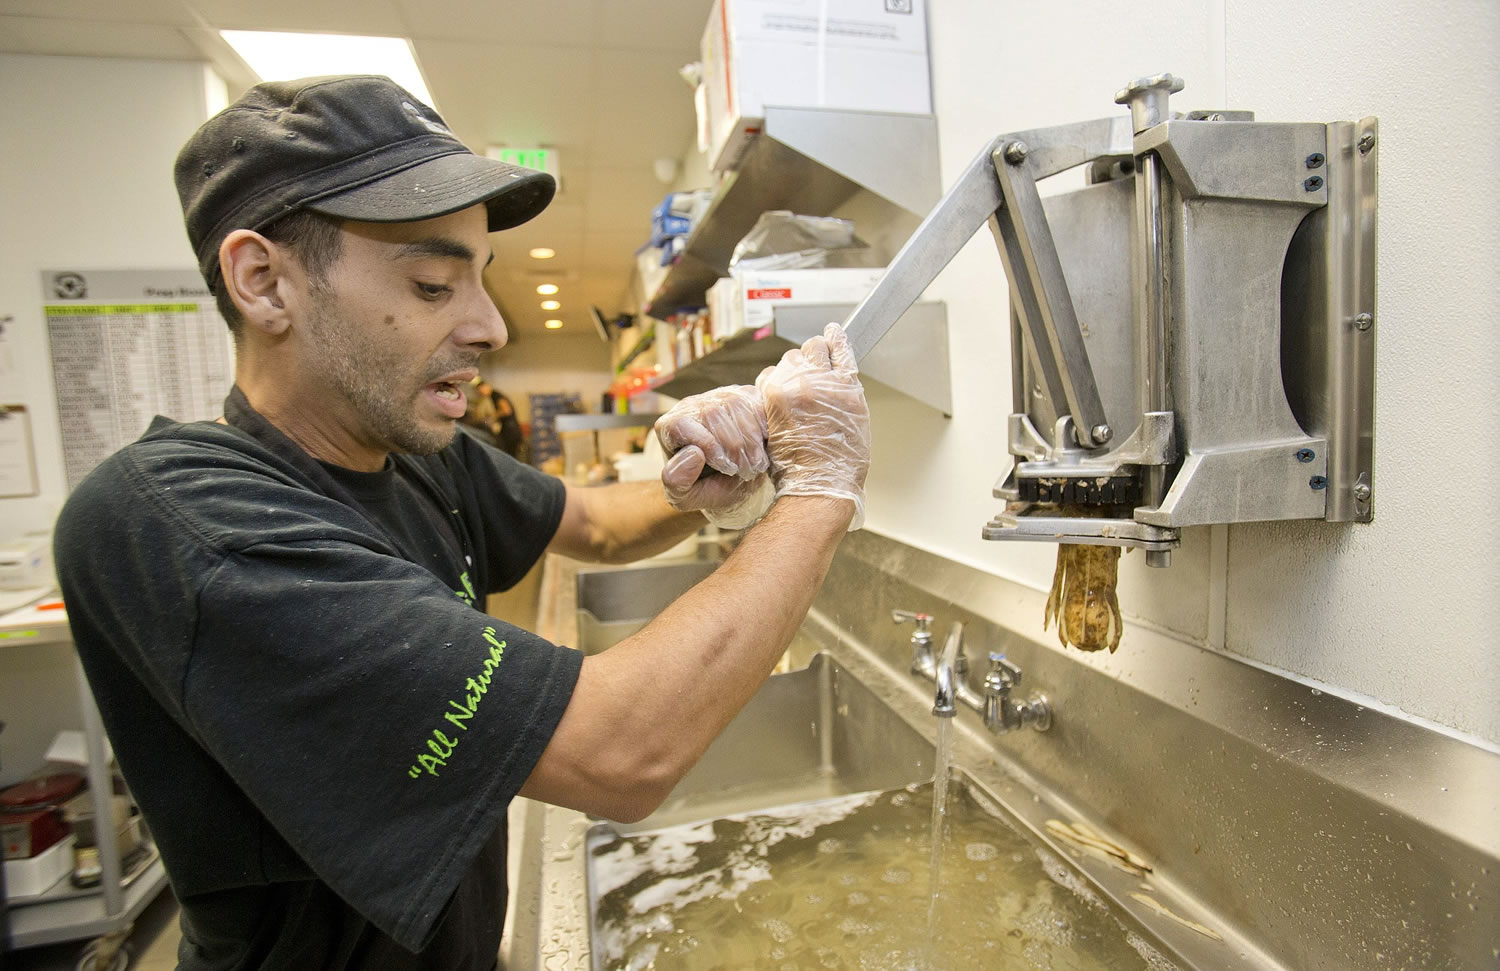 BurgerFi restaurant employee David Rivera makes french fries Tuesday at the store in Aventura, Fla. Companies such as the gourmet hamburger chain BurgerFi plan to nearly double in size from their existing 65 restaurants this year.